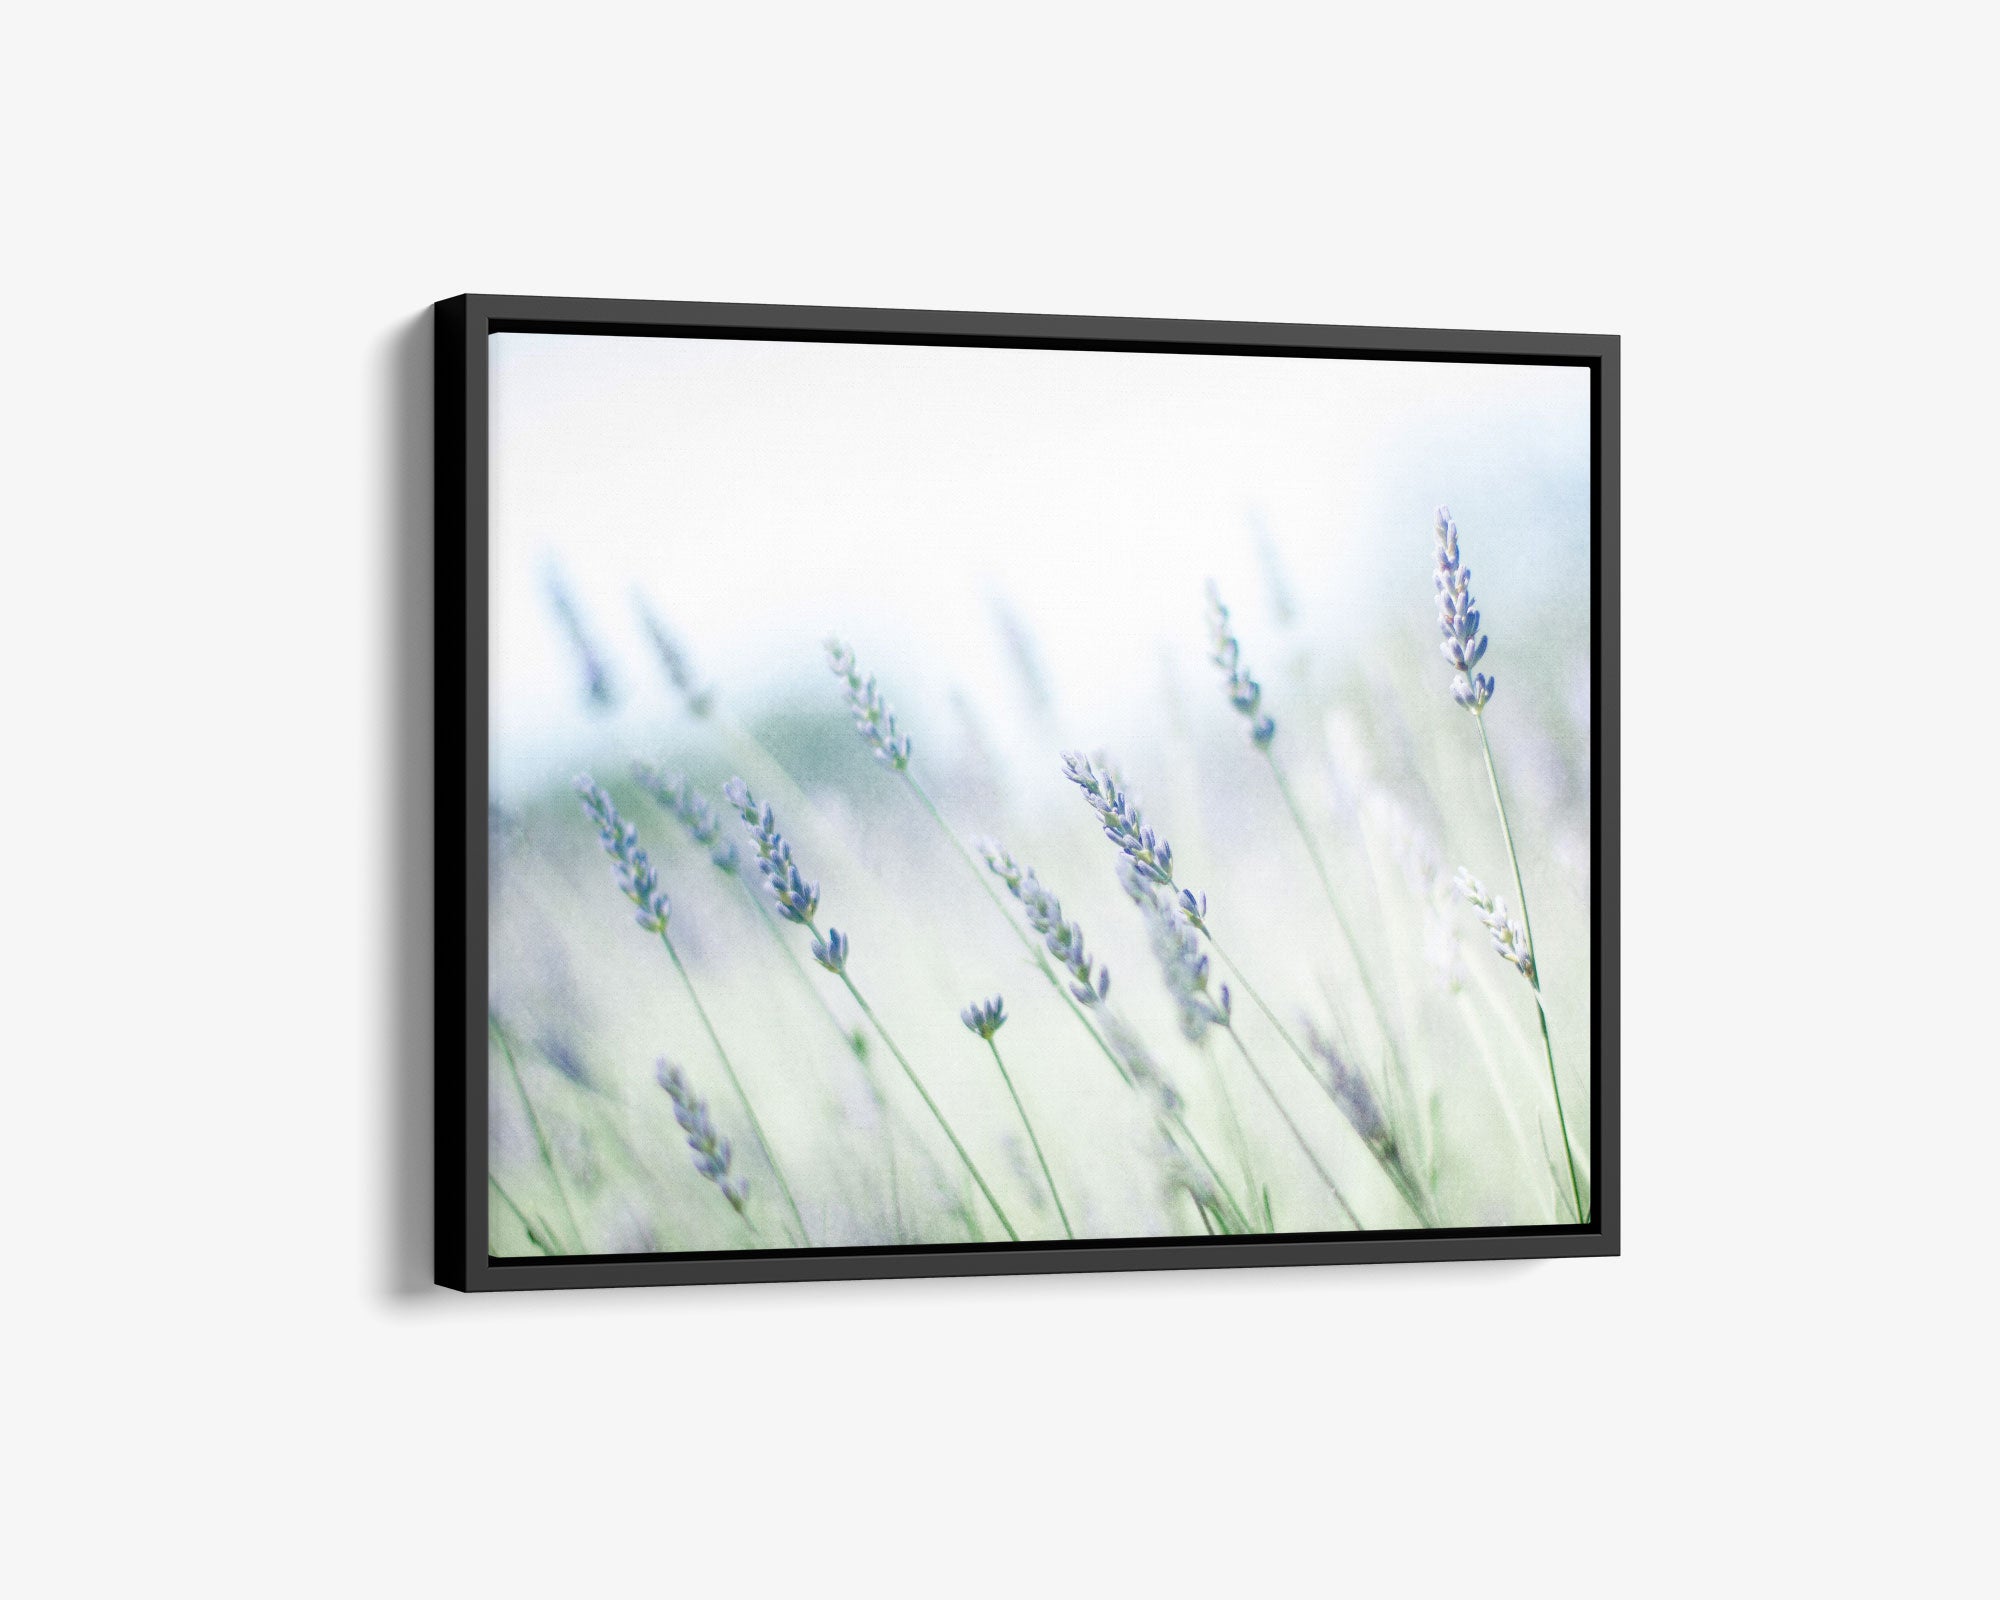 A Rustic Farmhouse Canvas Wall Art piece depicting a soft focus image of lavender plants, conveying a gentle and tranquil ambiance, hung against a plain white background.